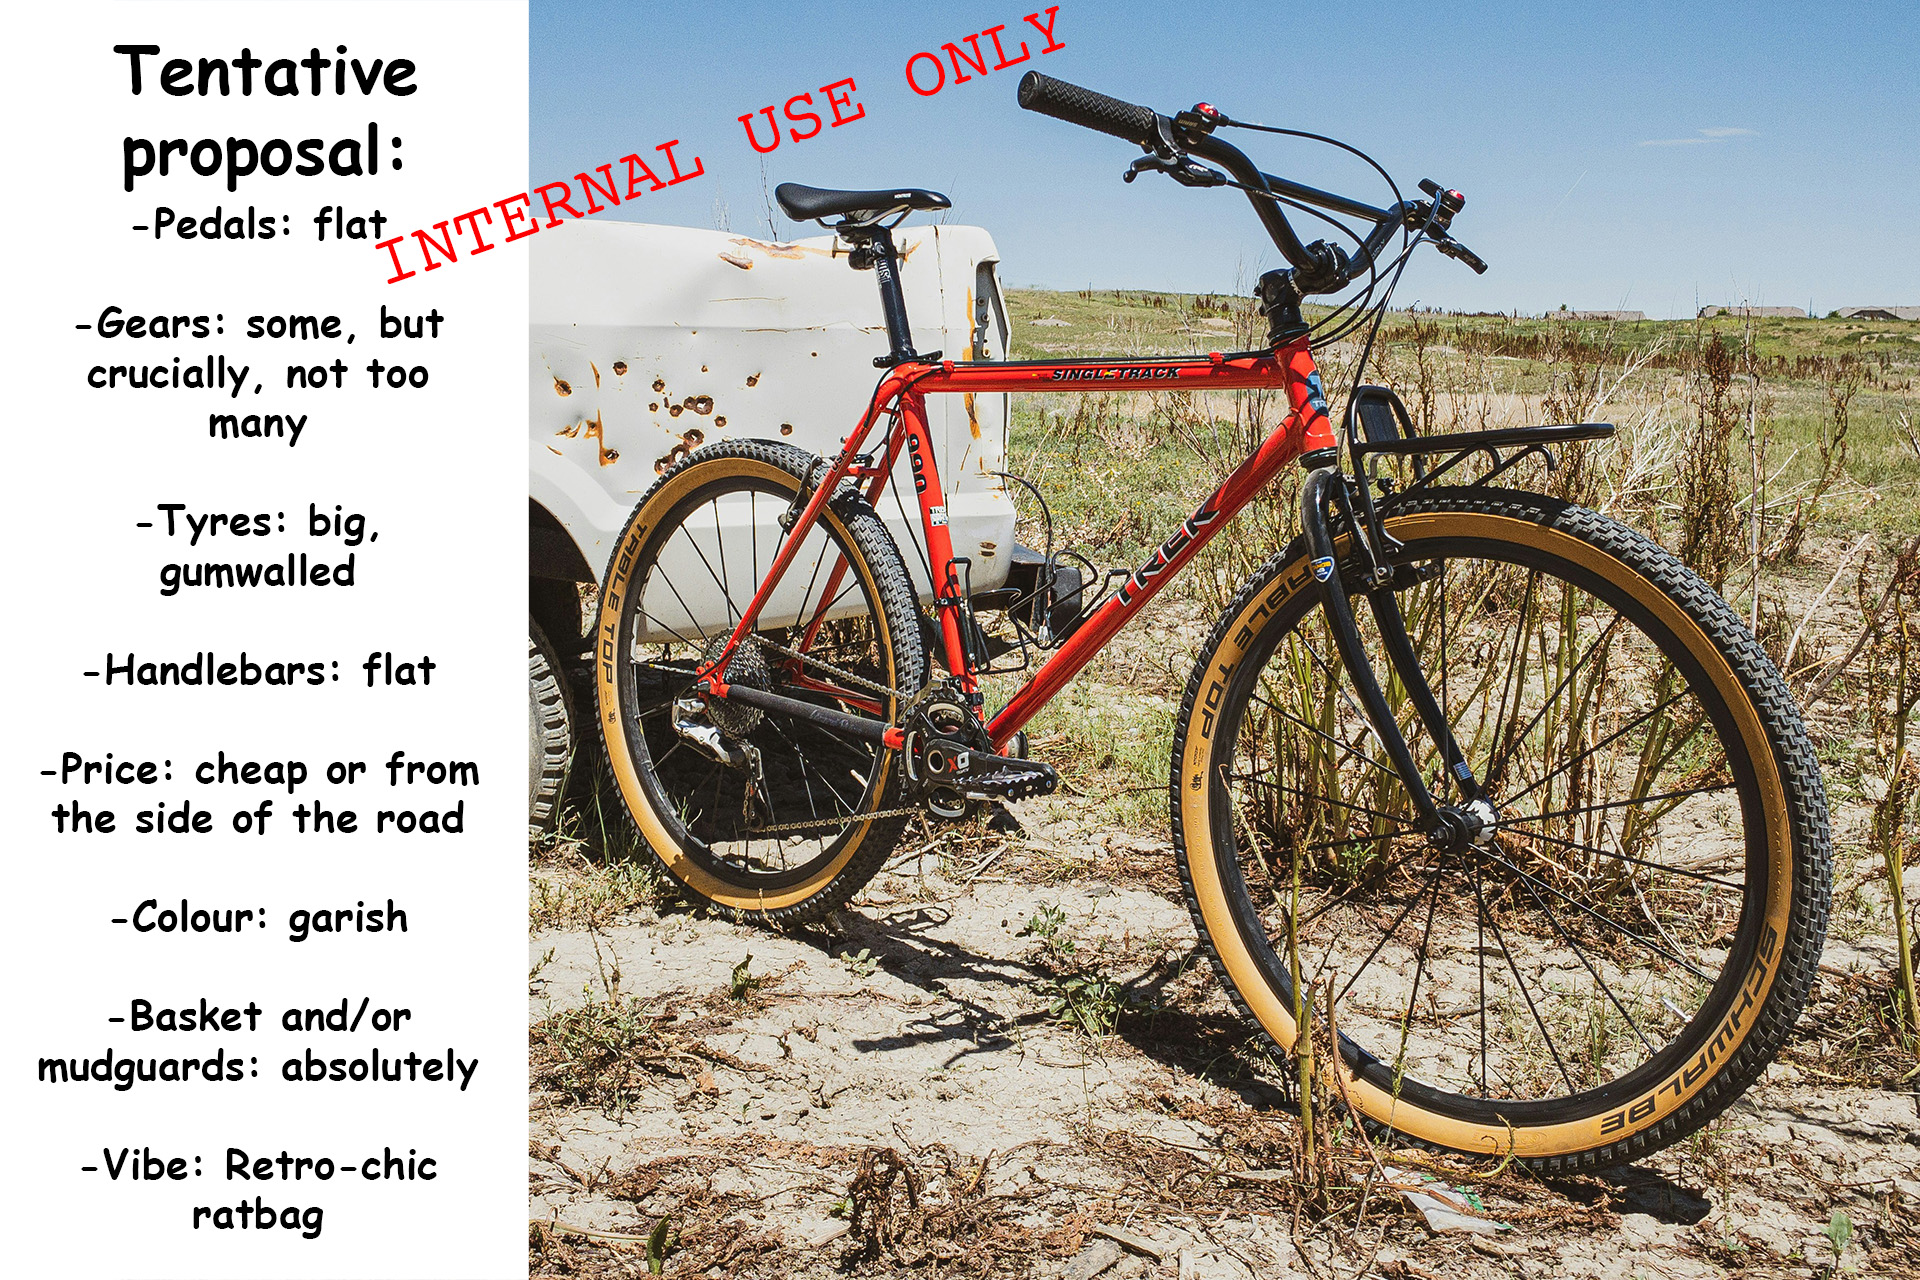 A crude Powerpoint slide marked 'Internal Use only', featuring a picture of an old mountain bike with a modern build. 

Text running down the side reads:
Tentative proposal:
Pedals: flat
Gears: some, but crucially, not too many
Tyres: big, gumwalled
Handlebars: flat
Price: cheap or from the side of the road
Colour: garish
Basket and mudguards: absolutely
Vibe: Retro-chic ratbag
